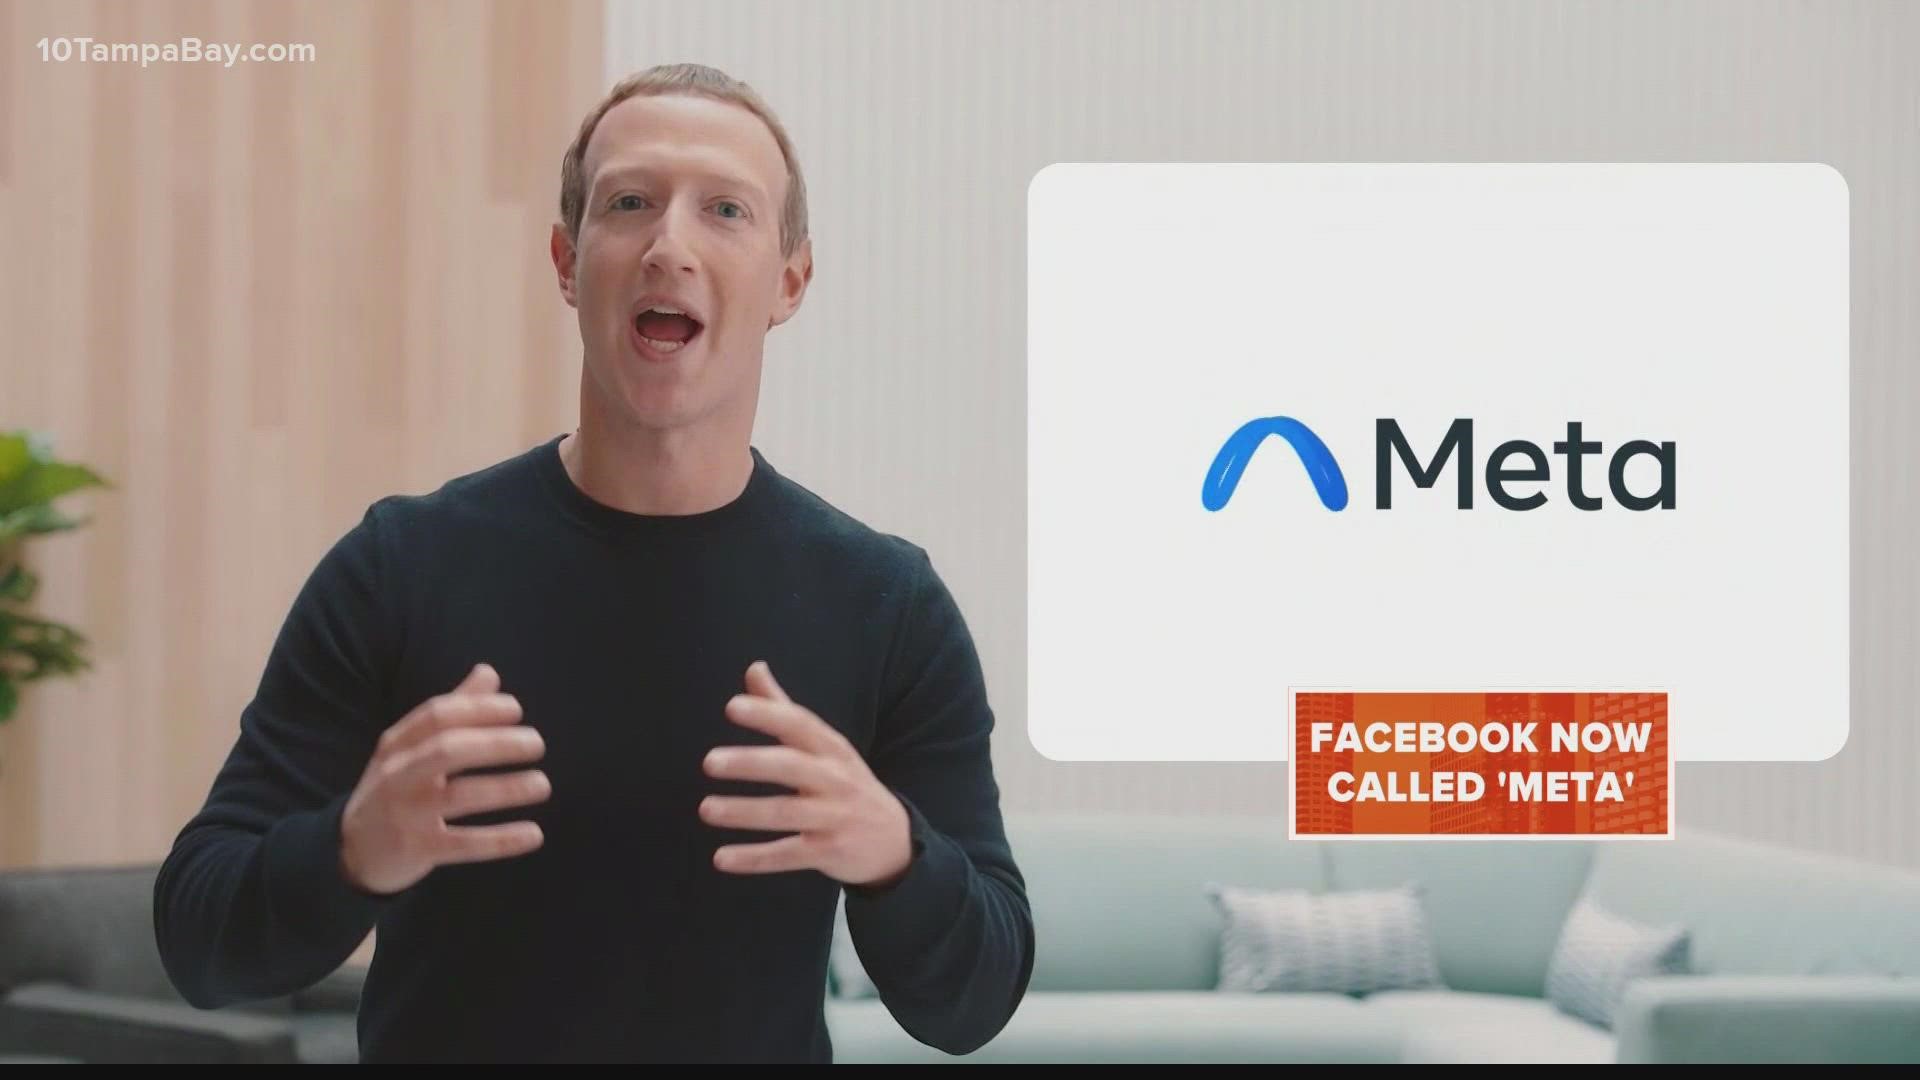 Embattled Facebook to rebrand as 'Meta' to emphasize virtual reality vision